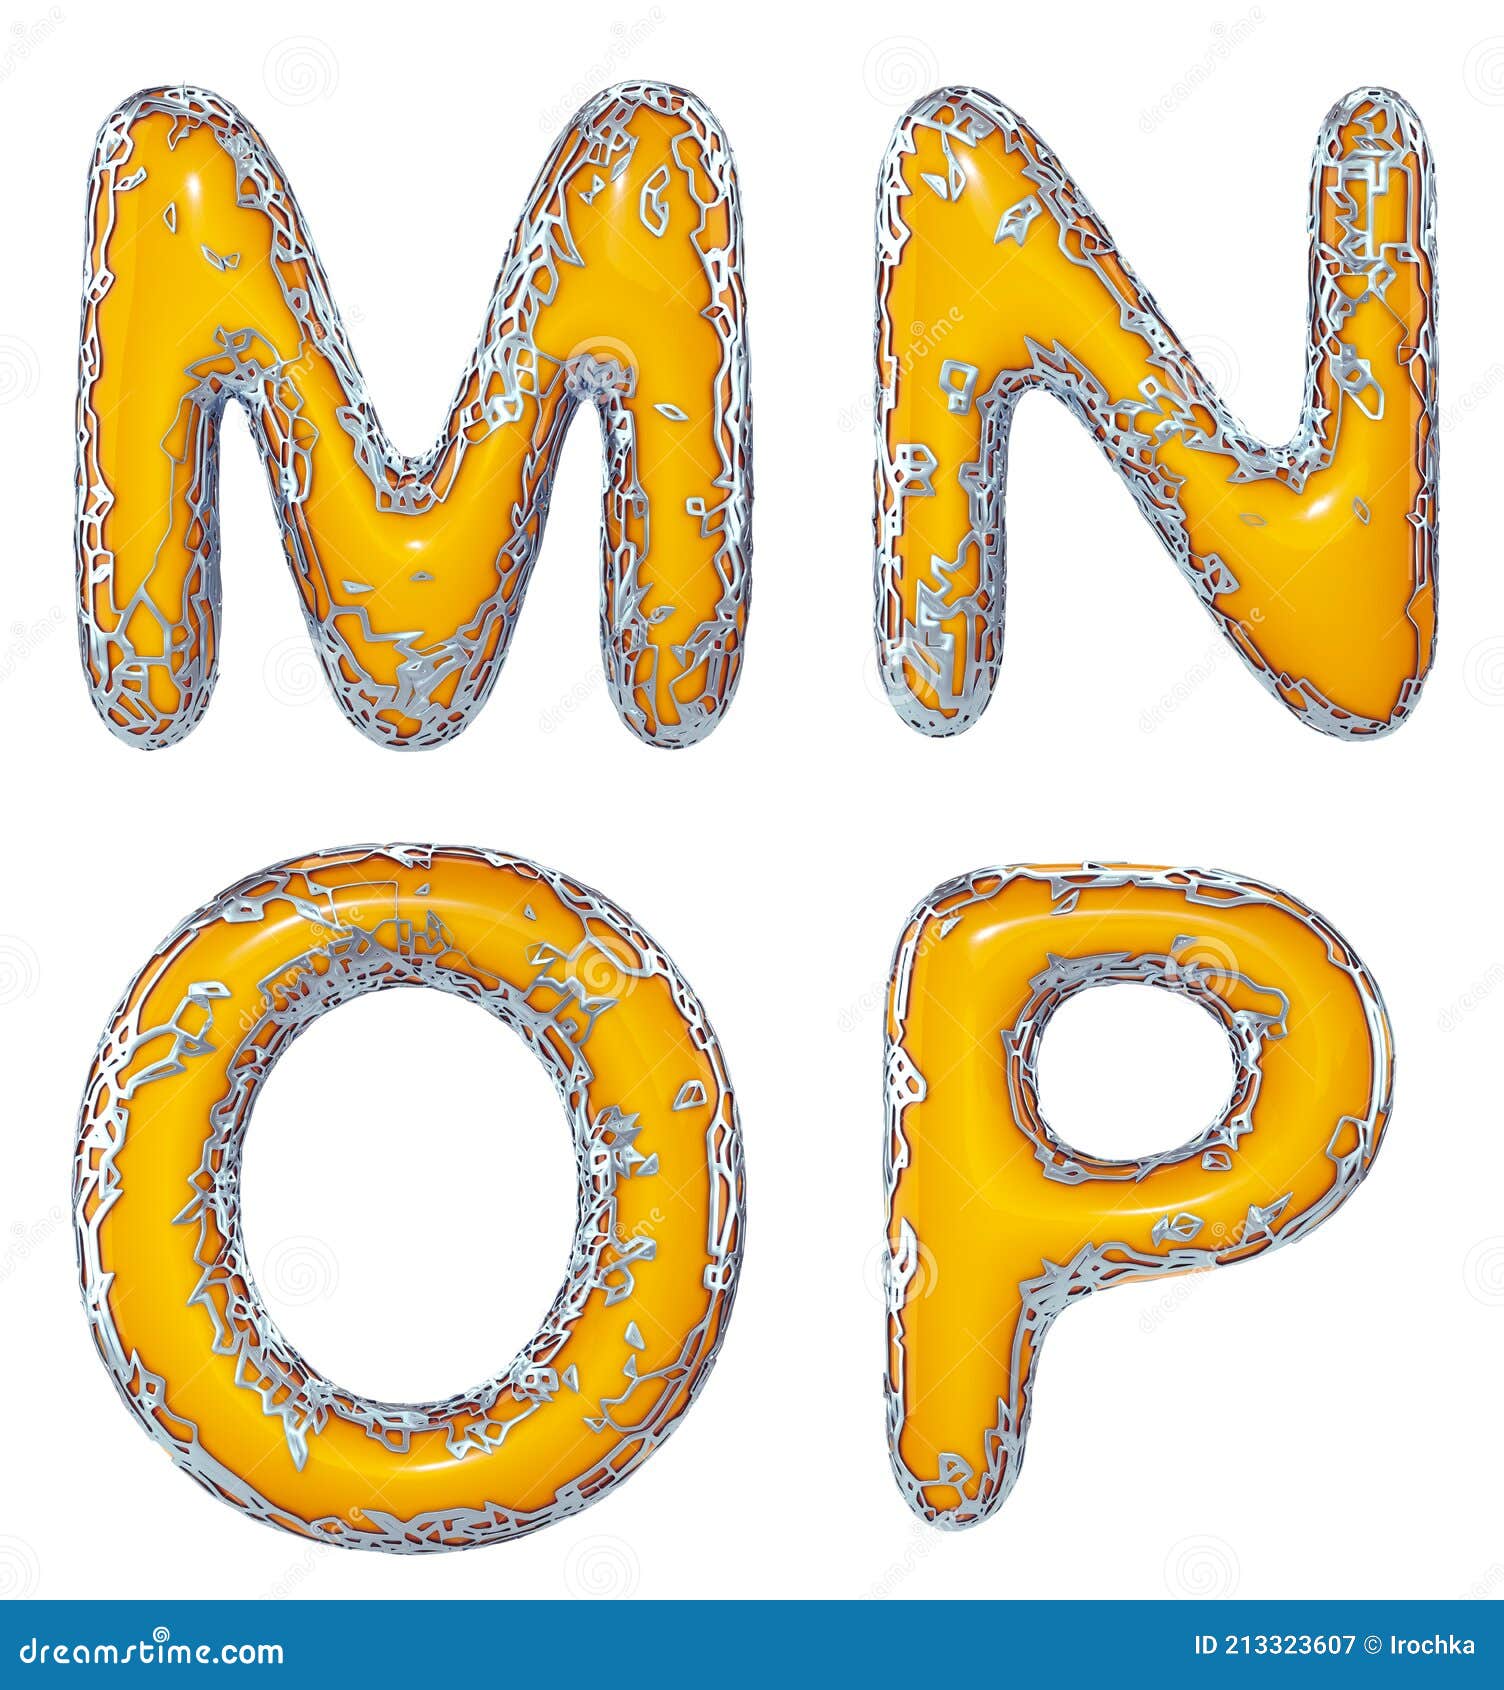 realistic 3d letters set m, n, o,p made of gold shining metal letters.